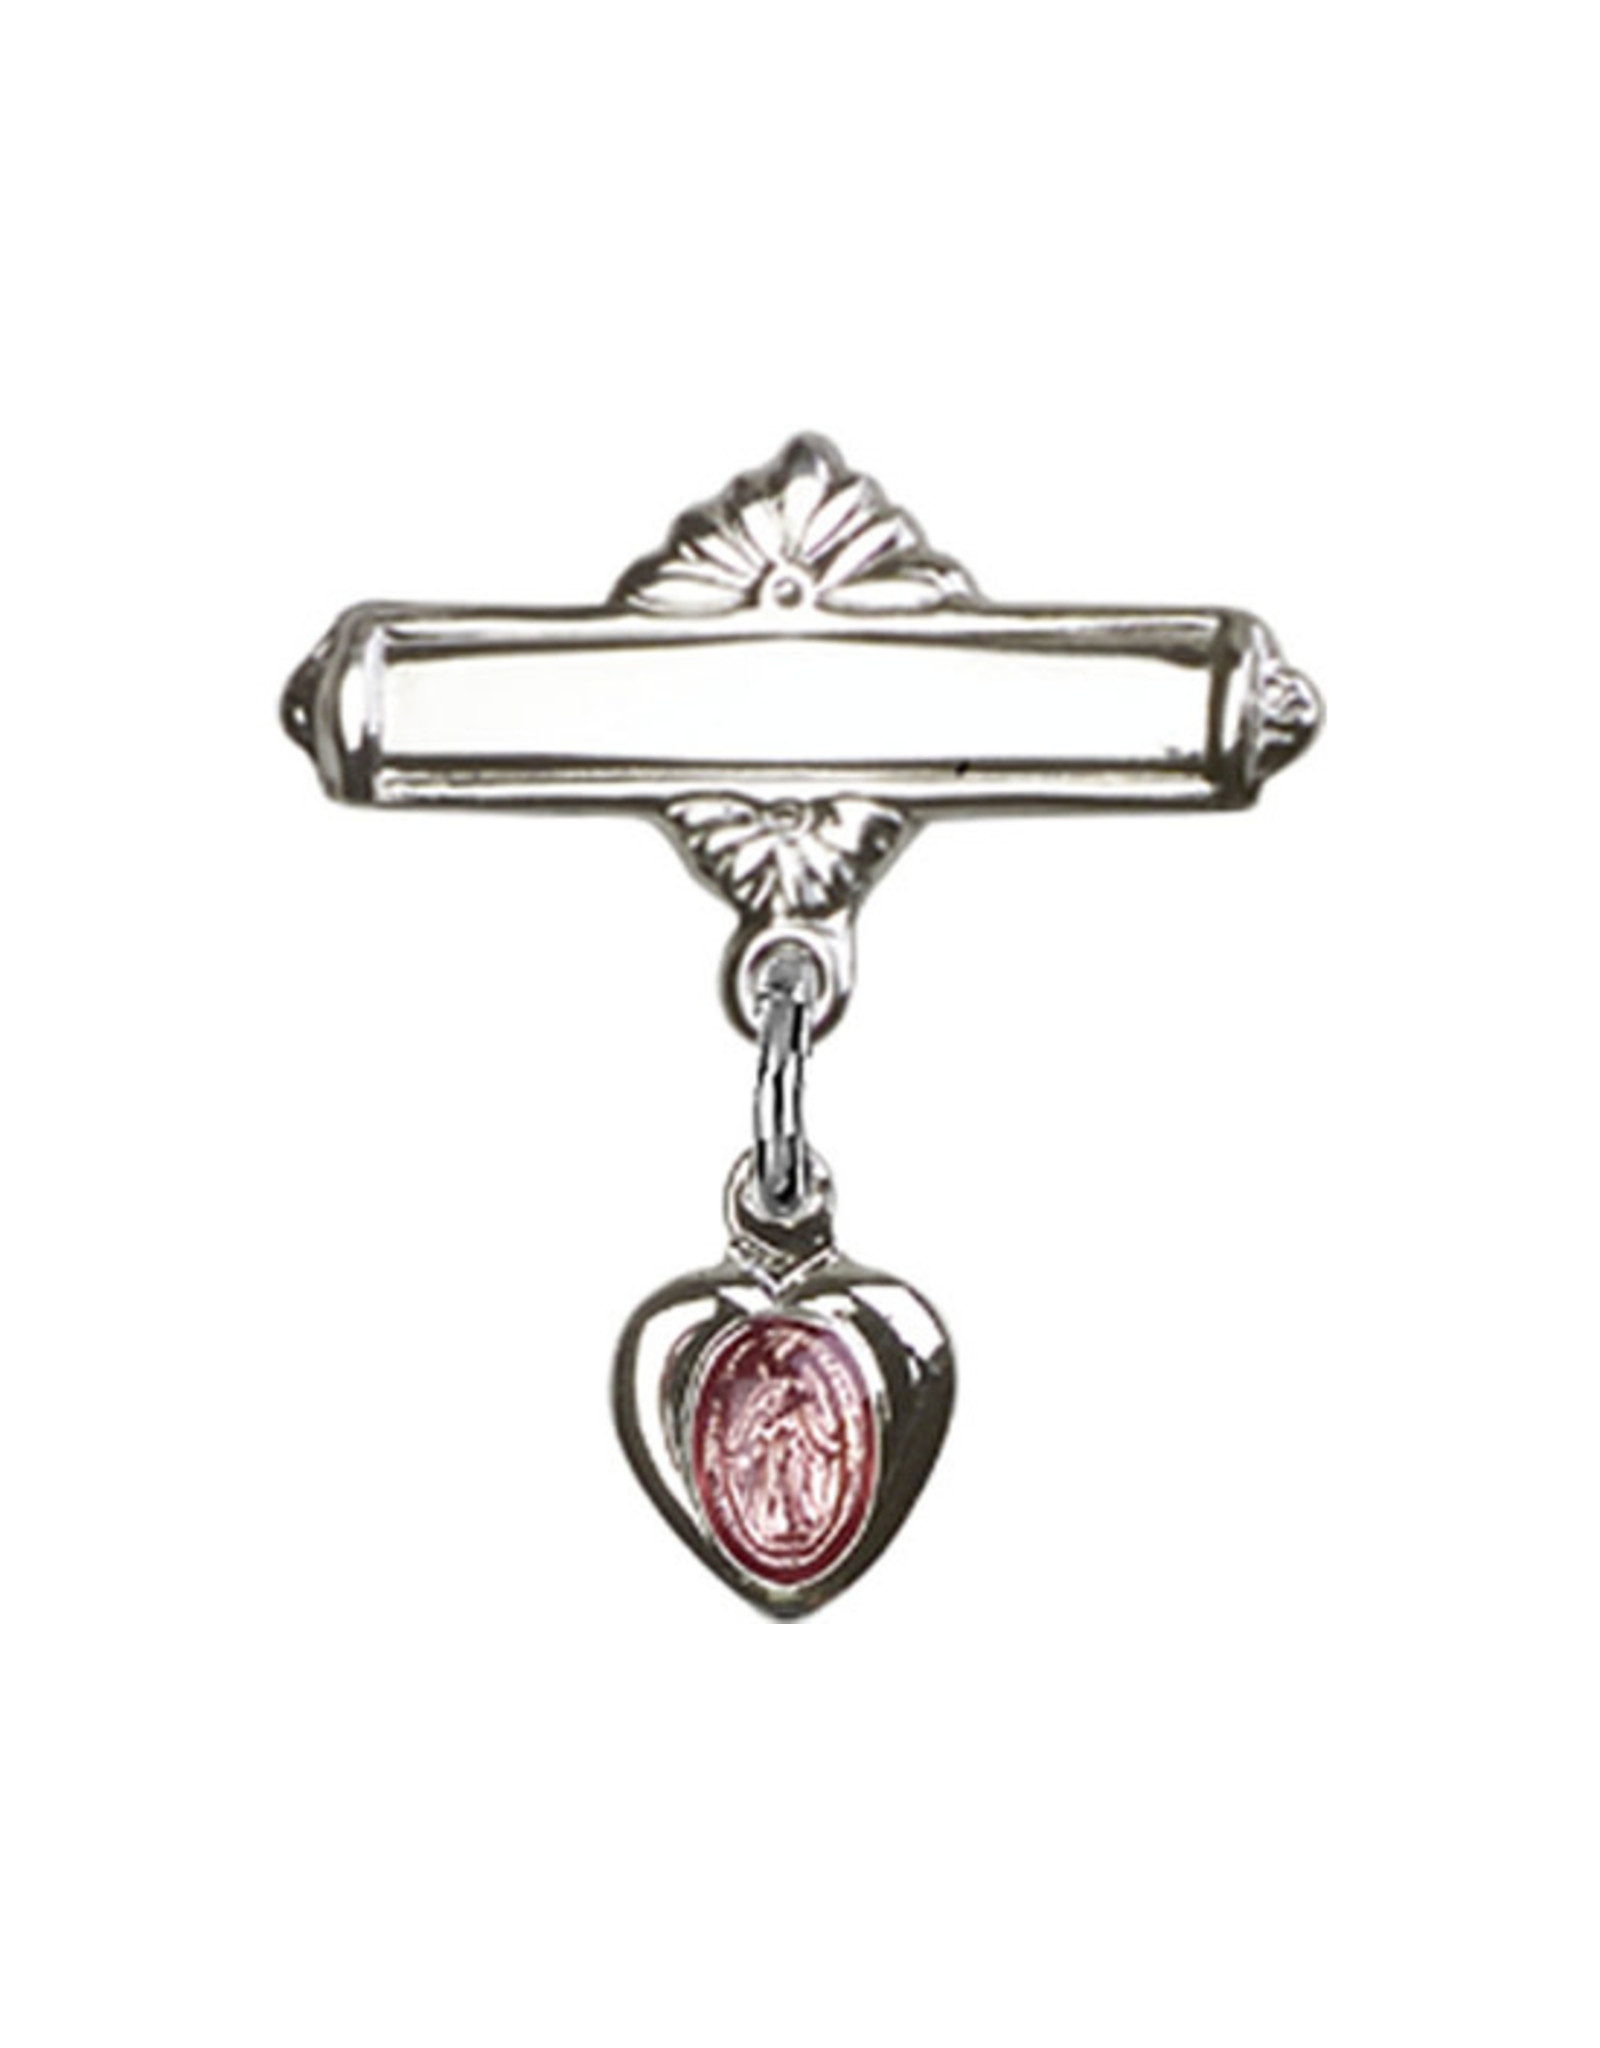 Bliss Baby Badge - Pink Epoxy, Sterling Silver with Miraculous Medal